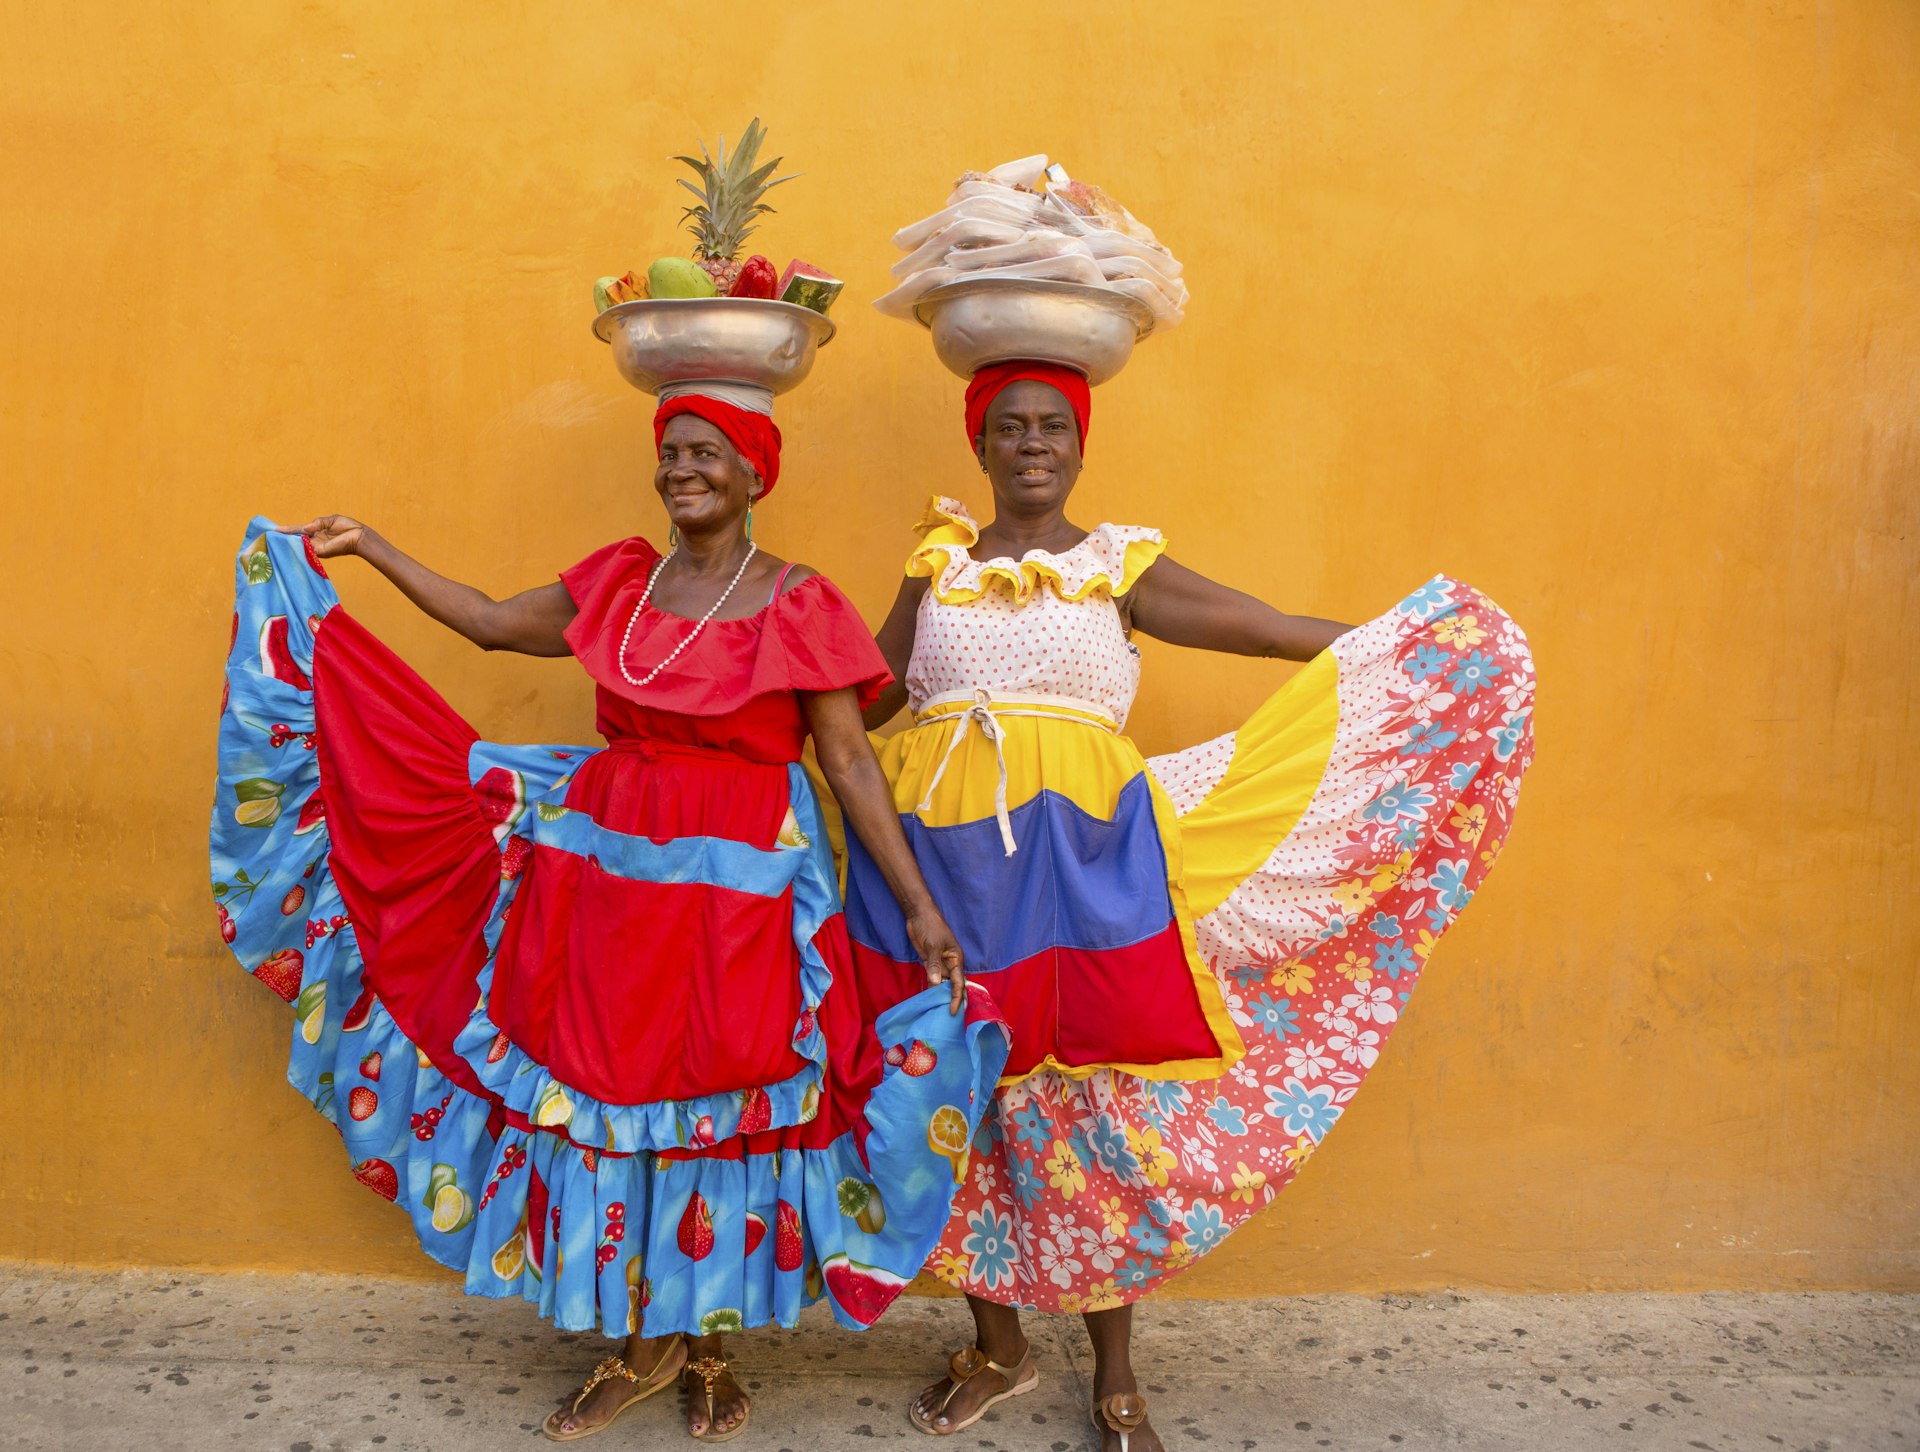 Two Palenqueras, colorfully dressed fruit vendors, in Cartagena, Colombia